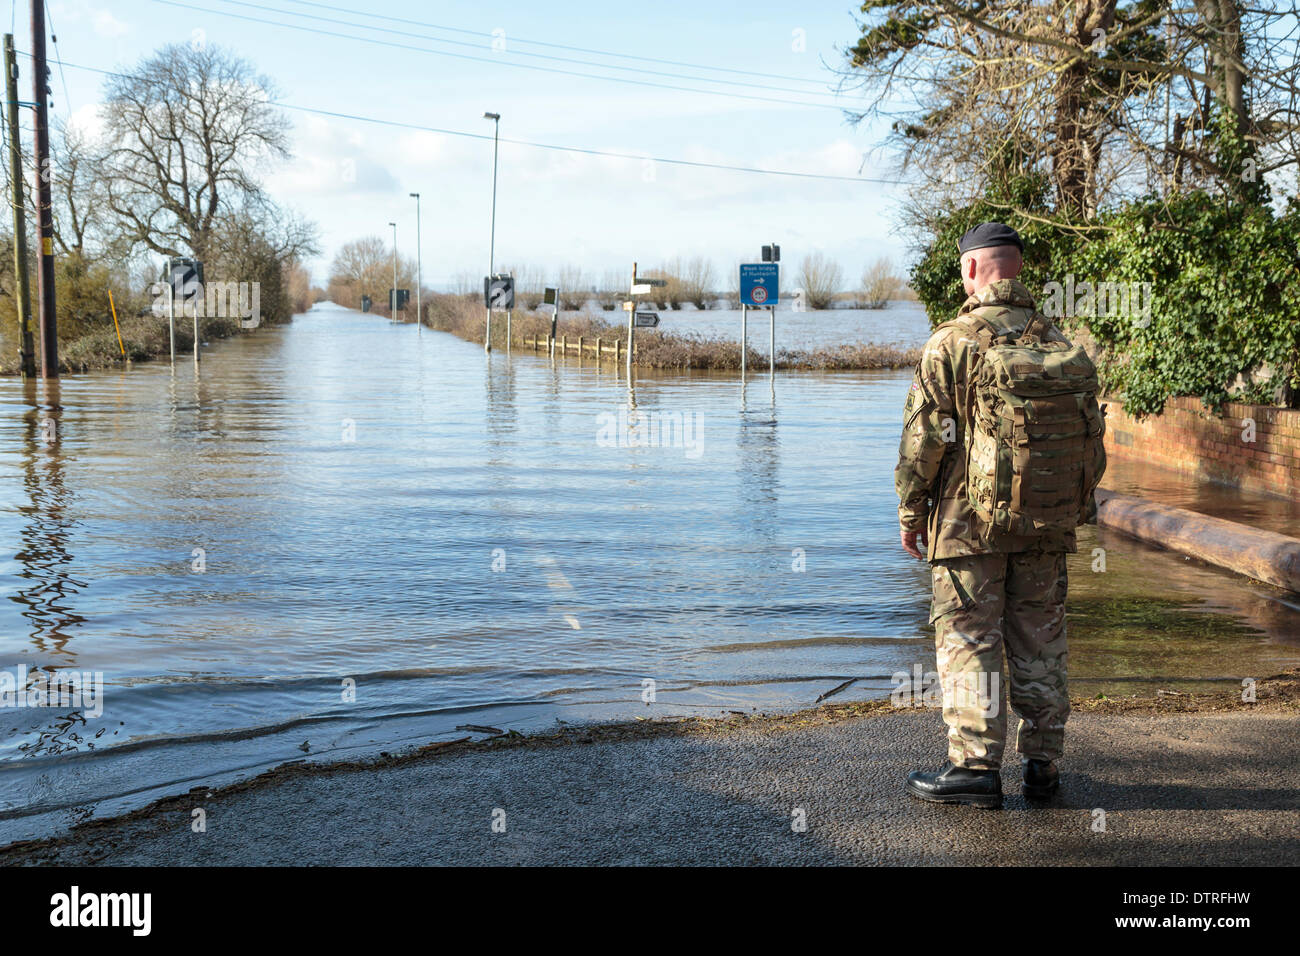 Burrowbridge, UK. 22nd Feb, 2014. An army commando observes the floods at Burrowbridge on the Somerset Levels, February 22, 2014. A team of highly trained soliders have been drafted in to transport supplies of oil and mechanical parts to Saltmoor Pumping Station where water from Northmoor is being pumped into the tidal River Parrett to provide relief to the flooded area. These are the worst floods on the Somerset Levels in living history. Stock Photo